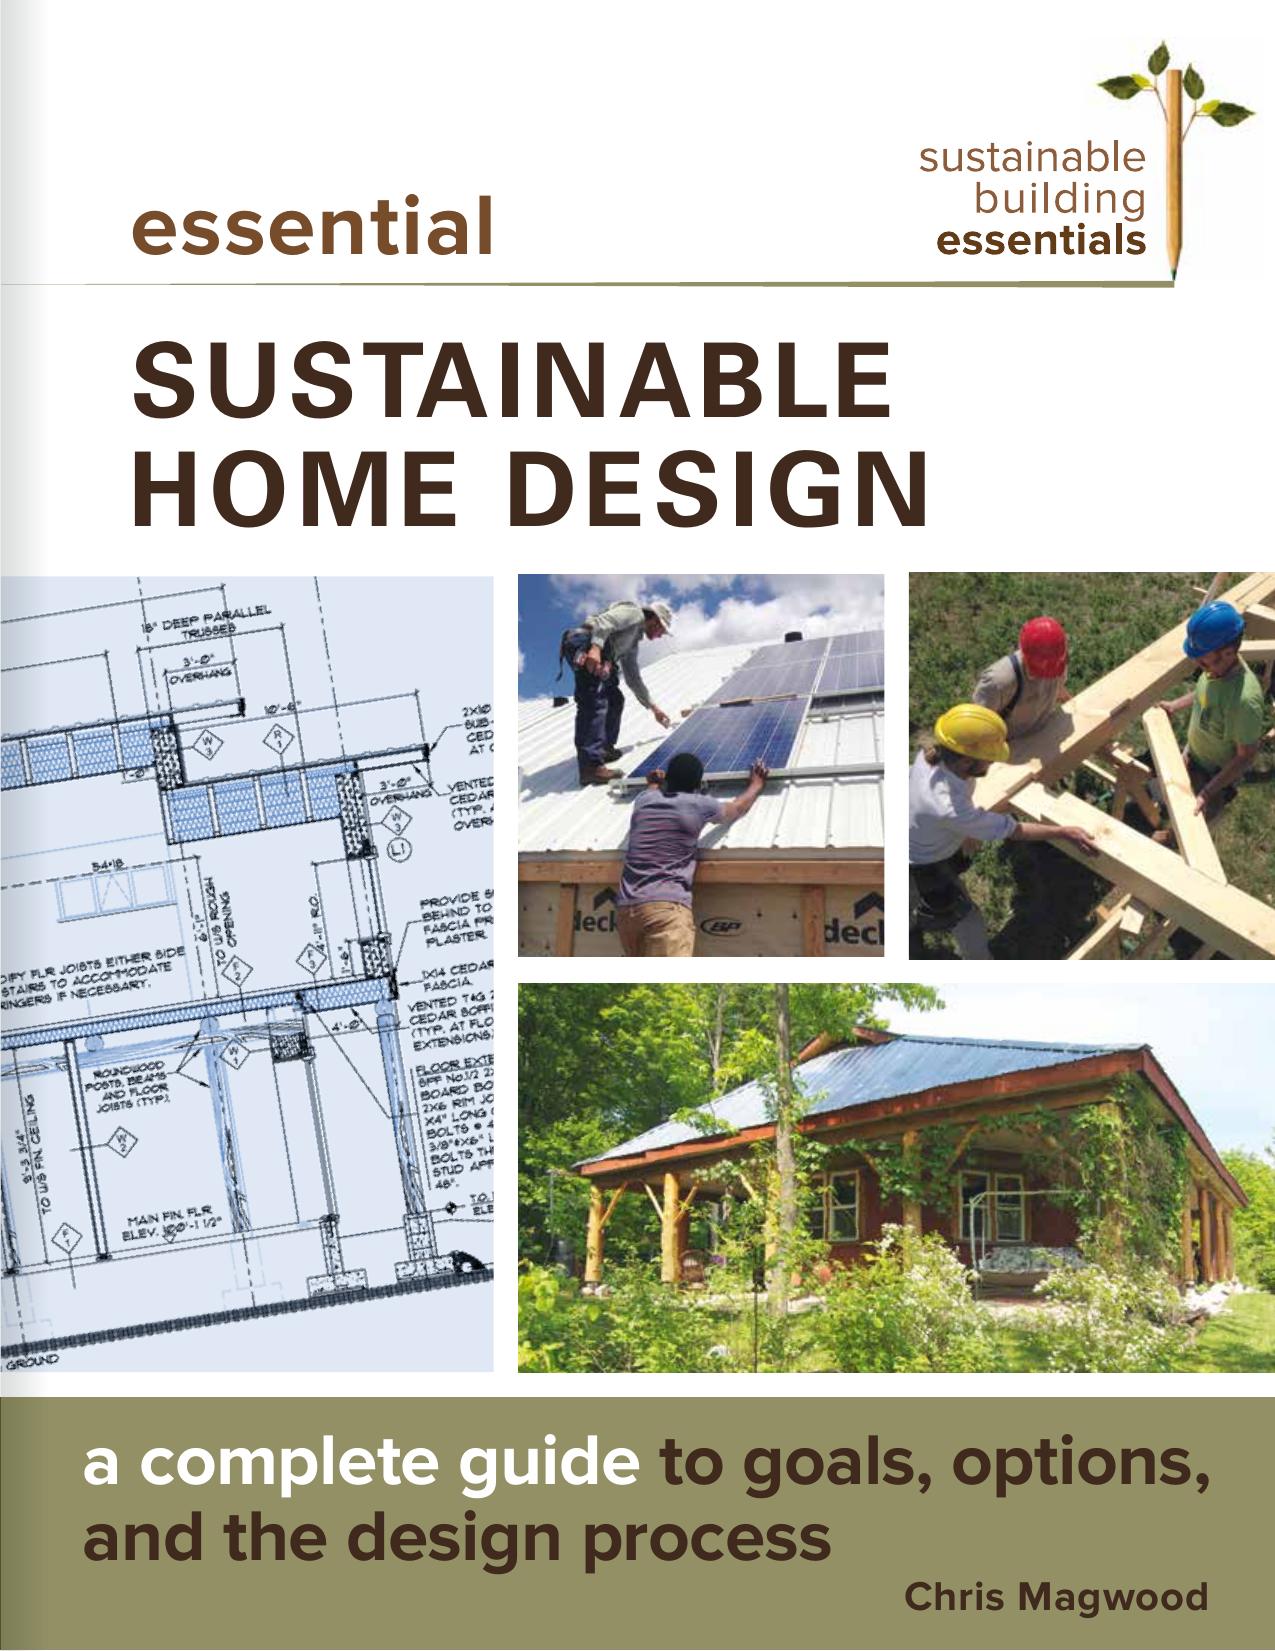 Essential Sustainable Home Design A Complete Guide 2017